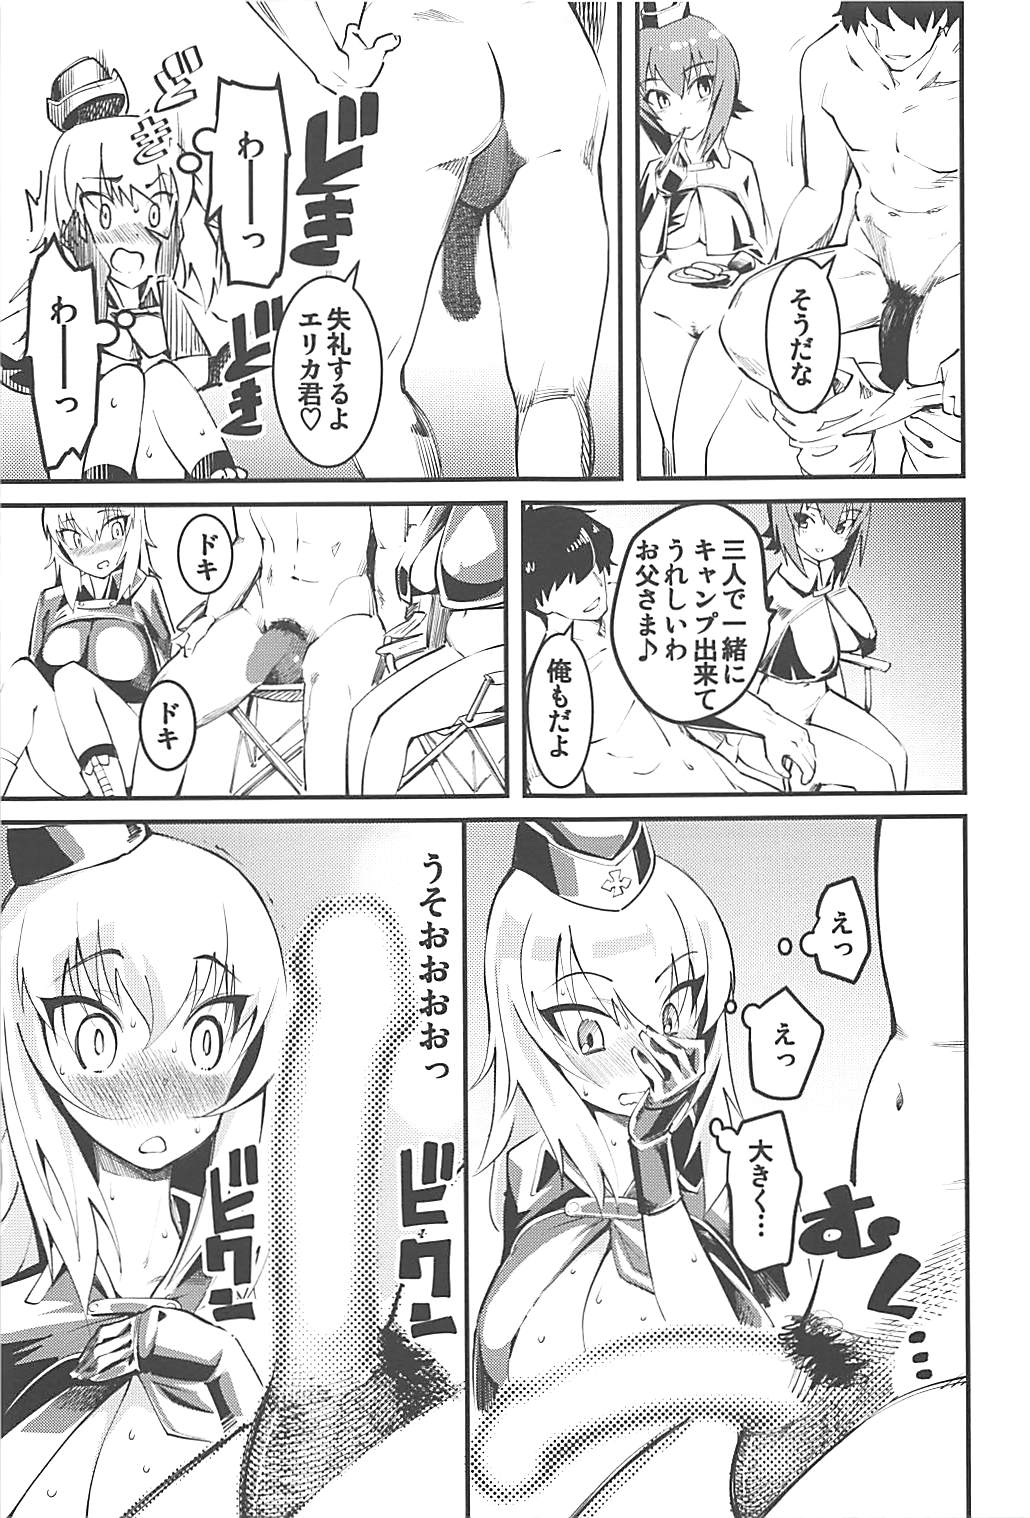 (COMIC1☆13) [ハイパーピンチ (clover)] GIRLS and CAMPER and NUDIST (ガールズ&パンツァー)